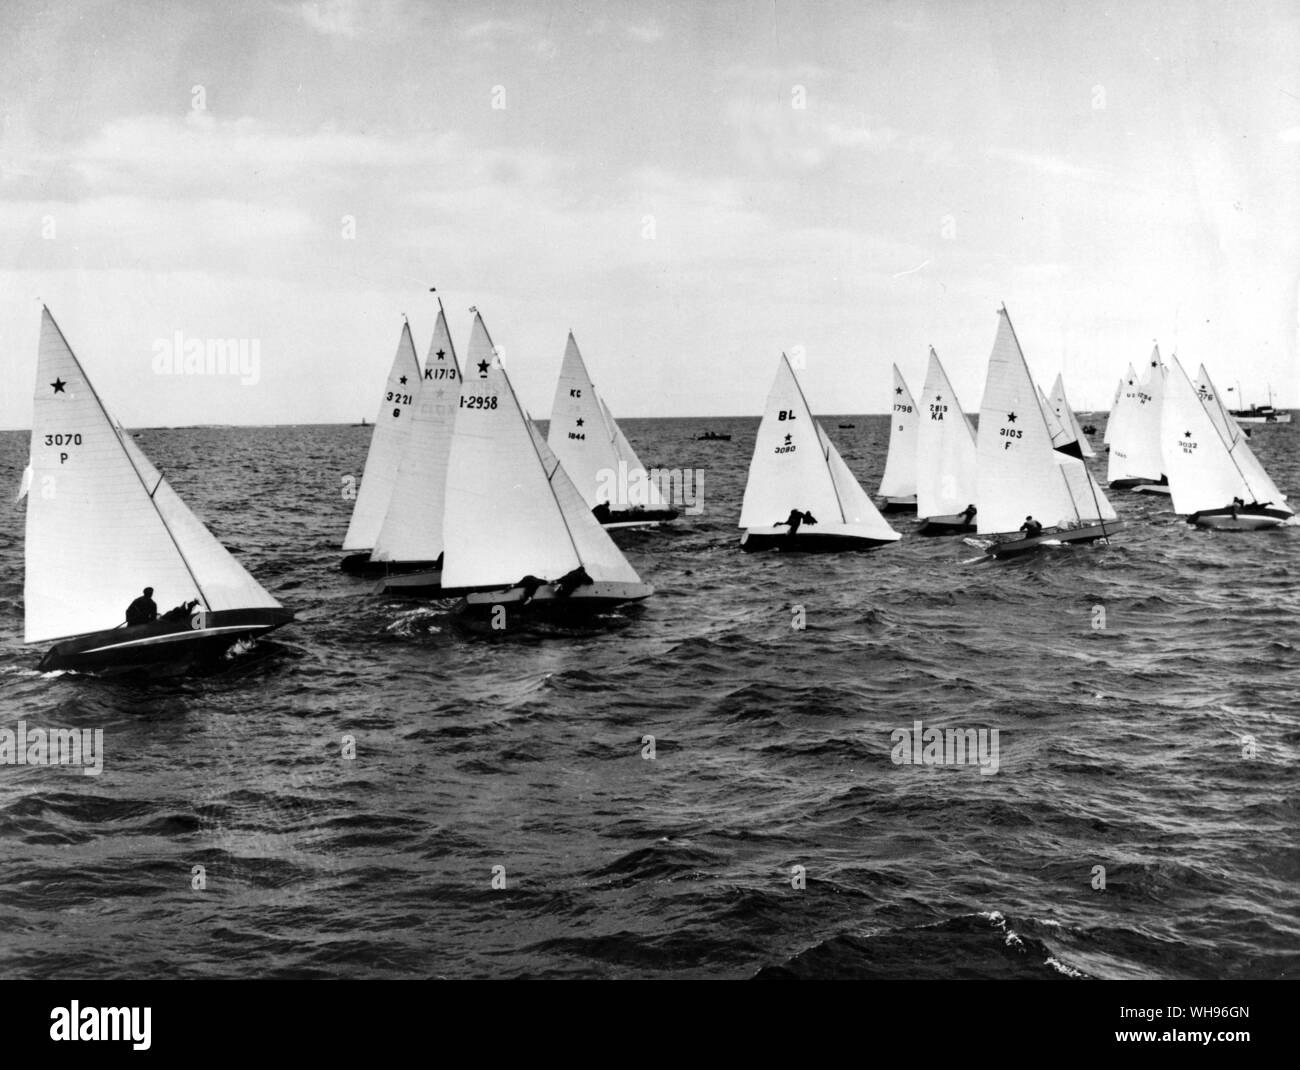 Finland,Helsinki/ Olympics,1952: Yachting competition at Harmaja - the start of the race of the Star Class.. Stock Photo